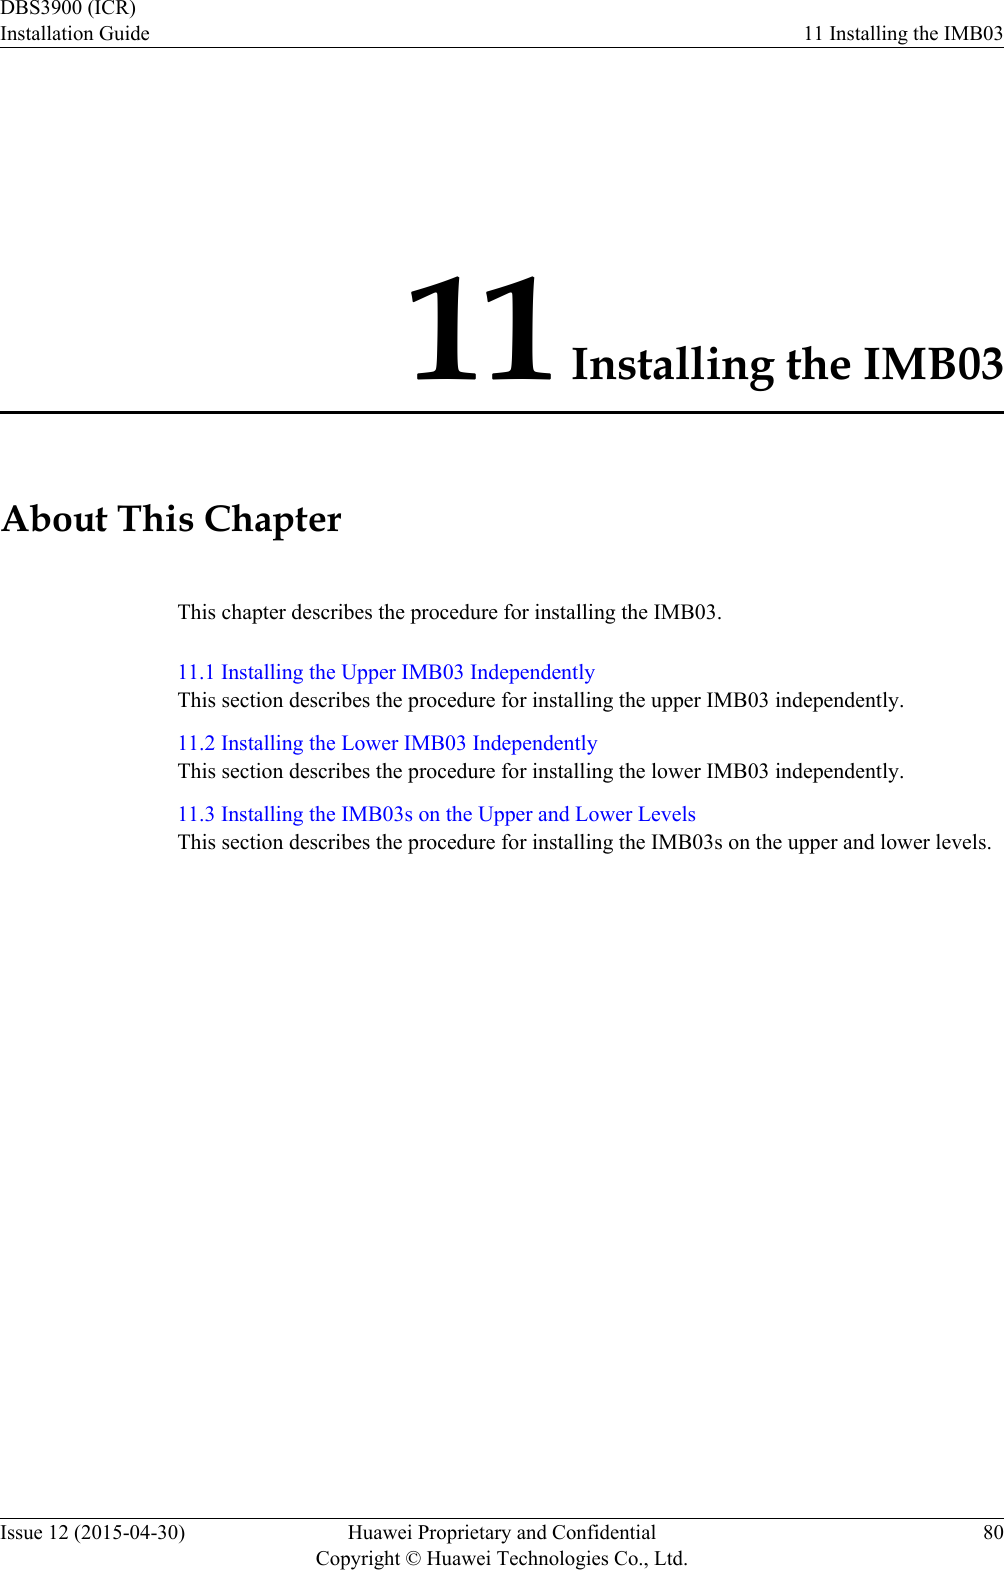 11 Installing the IMB03About This ChapterThis chapter describes the procedure for installing the IMB03.11.1 Installing the Upper IMB03 IndependentlyThis section describes the procedure for installing the upper IMB03 independently.11.2 Installing the Lower IMB03 IndependentlyThis section describes the procedure for installing the lower IMB03 independently.11.3 Installing the IMB03s on the Upper and Lower LevelsThis section describes the procedure for installing the IMB03s on the upper and lower levels.DBS3900 (ICR)Installation Guide 11 Installing the IMB03Issue 12 (2015-04-30) Huawei Proprietary and ConfidentialCopyright © Huawei Technologies Co., Ltd.80